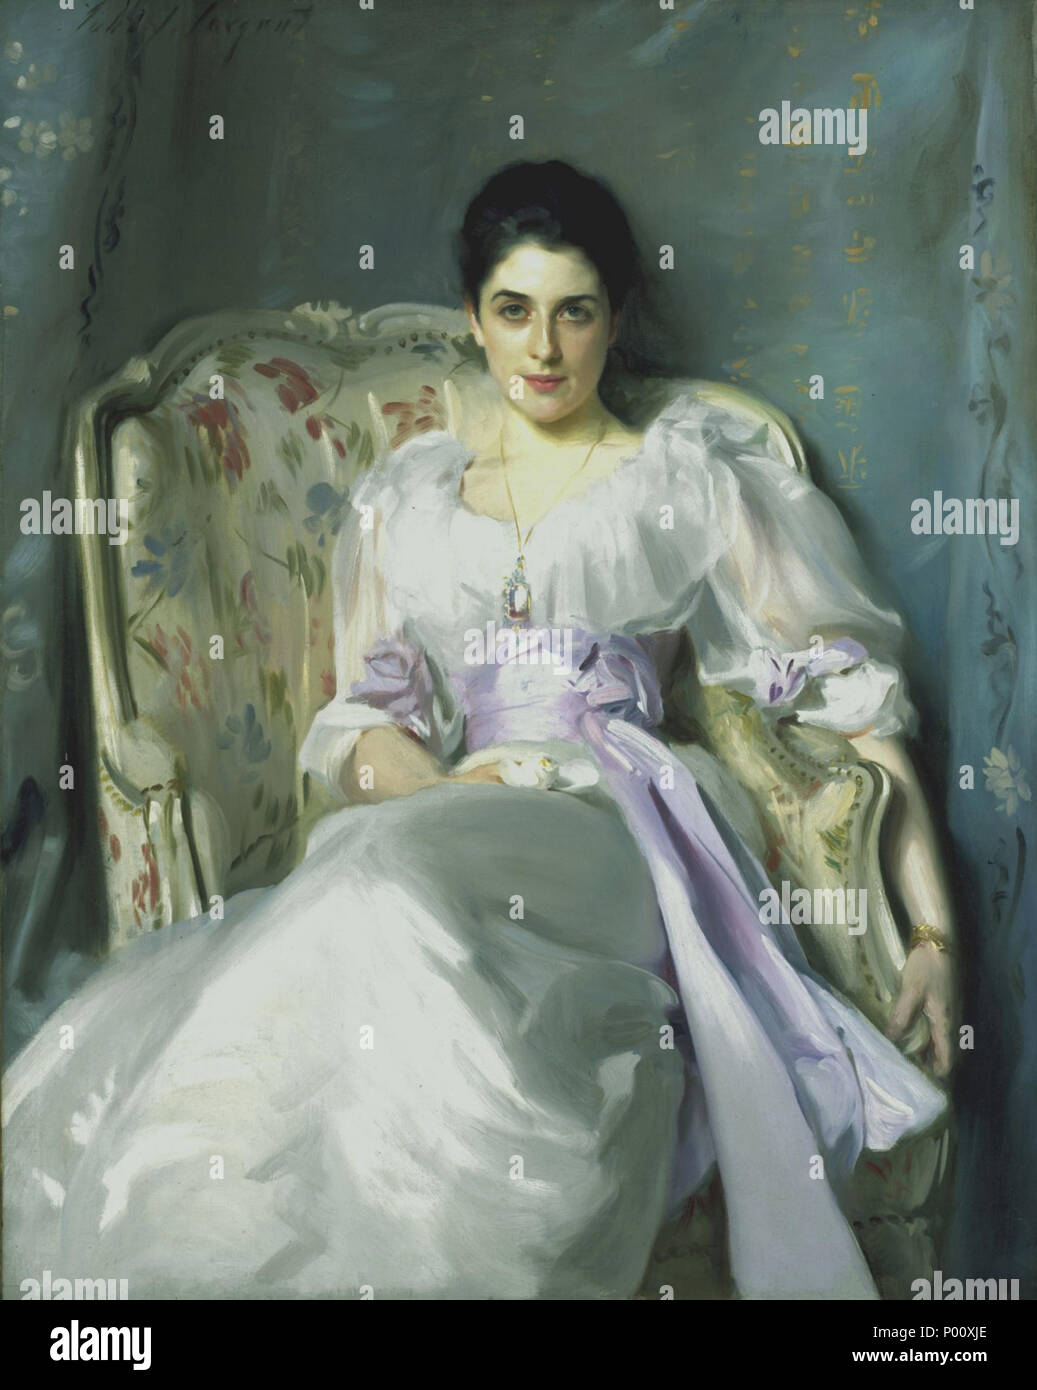 .  English: Lady Agnew's direct gaze and informal pose, emphasised by the flowing fabric and lilac sash of her dress ensure the portrait's striking impact. Andrew Noel Agnew, a barrister who had inherited the baronetcy and estates of Lochnaw in Galloway, commissioned this painting of his young wife, Gertrude Vernon (1865-1932), in 1892. It was exhibited at the Royal Academy in 1898 and made Sargent's name. The sculptor Rodin described him as 'the Van Dyck of our times'. Portrait commissions poured in and Sargent enjoyed something of a cult following in Edwardian society. It also launched Lady  Stock Photo